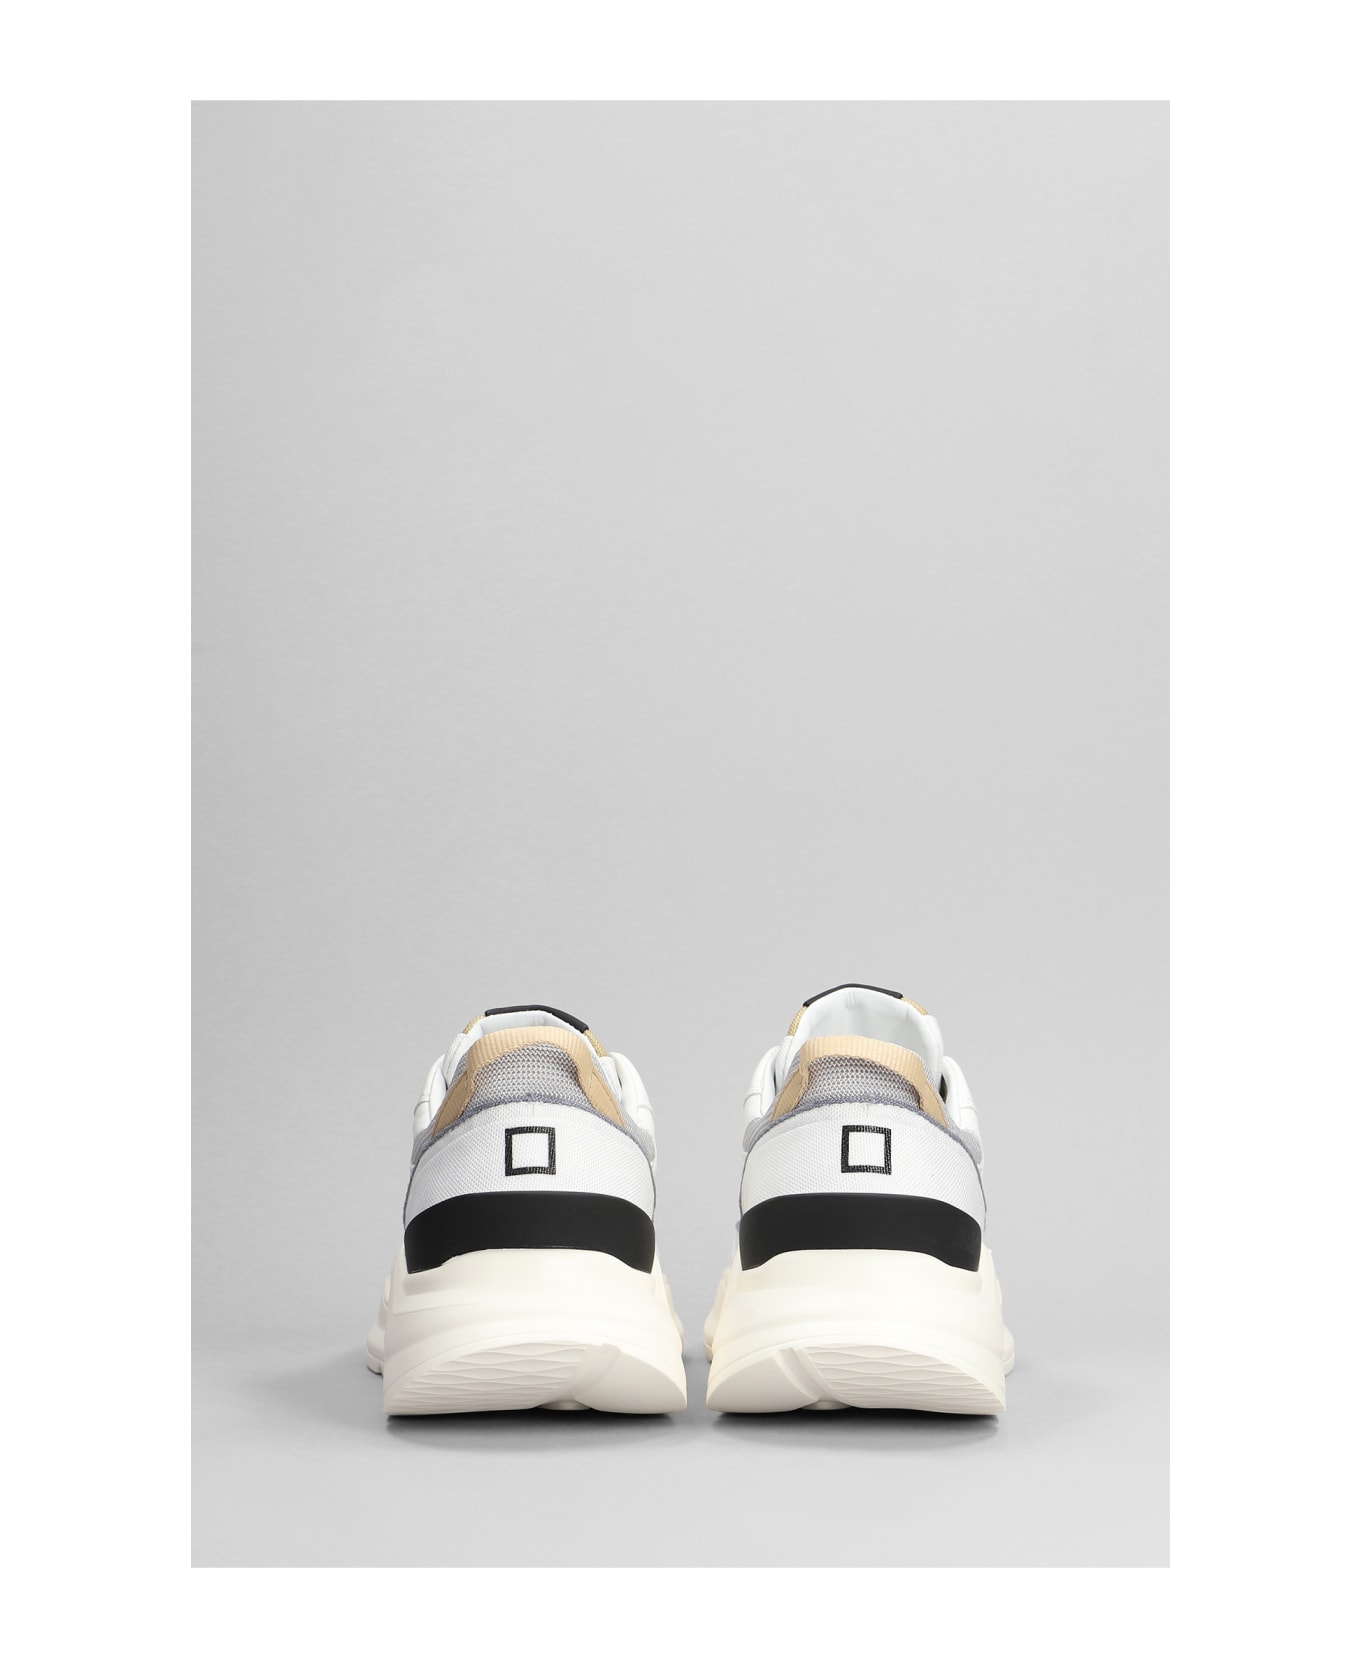 D.A.T.E. Fuga Sneakers In White Leather And Fabric - white スニーカー